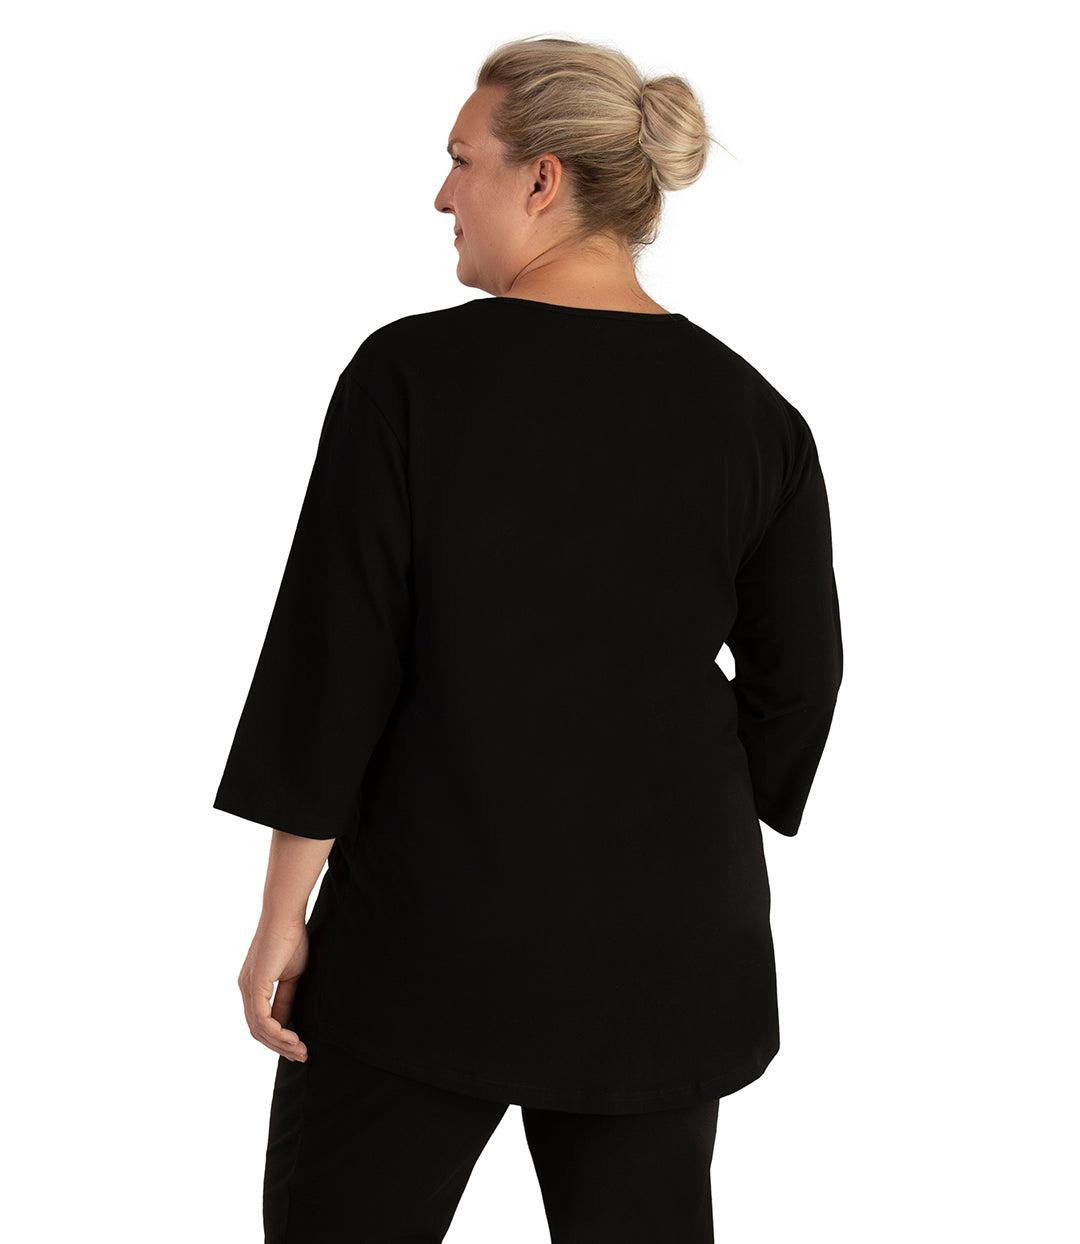 Plus size woman, facing back looking left, wearing JunoActive plus size Stretch Naturals Scoop Neck ¾ Sleeve Top in the color Black. She is wearing JunoActive Plus Size Leggings in the color Black.